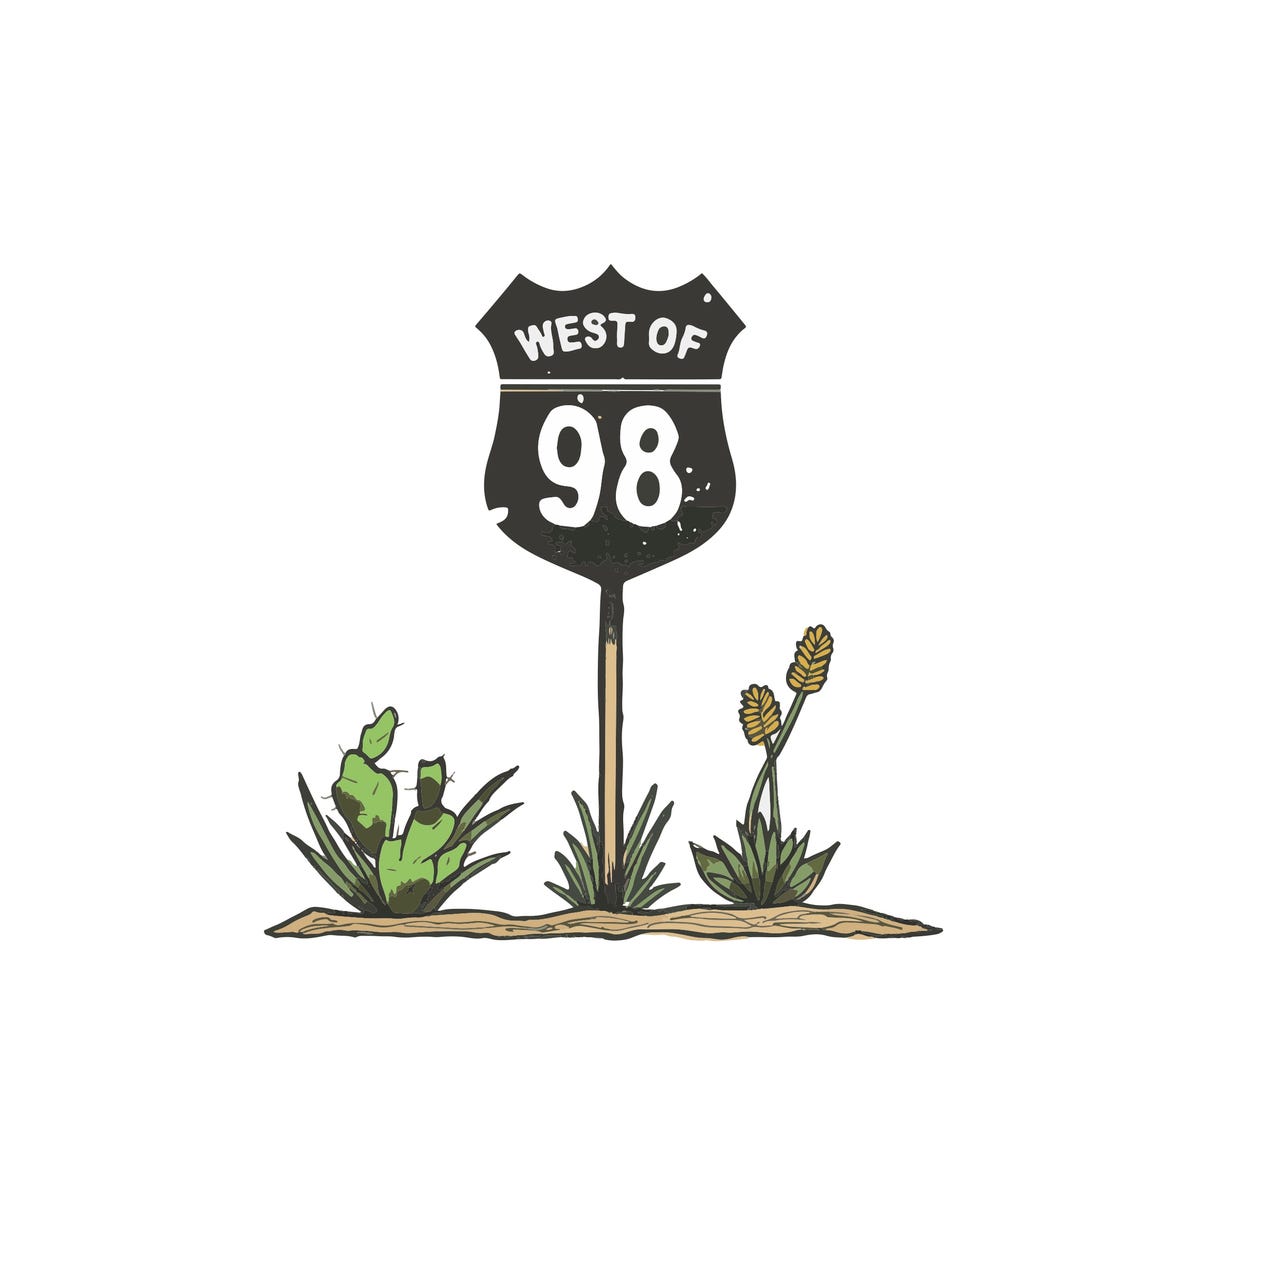 Artwork for West of 98